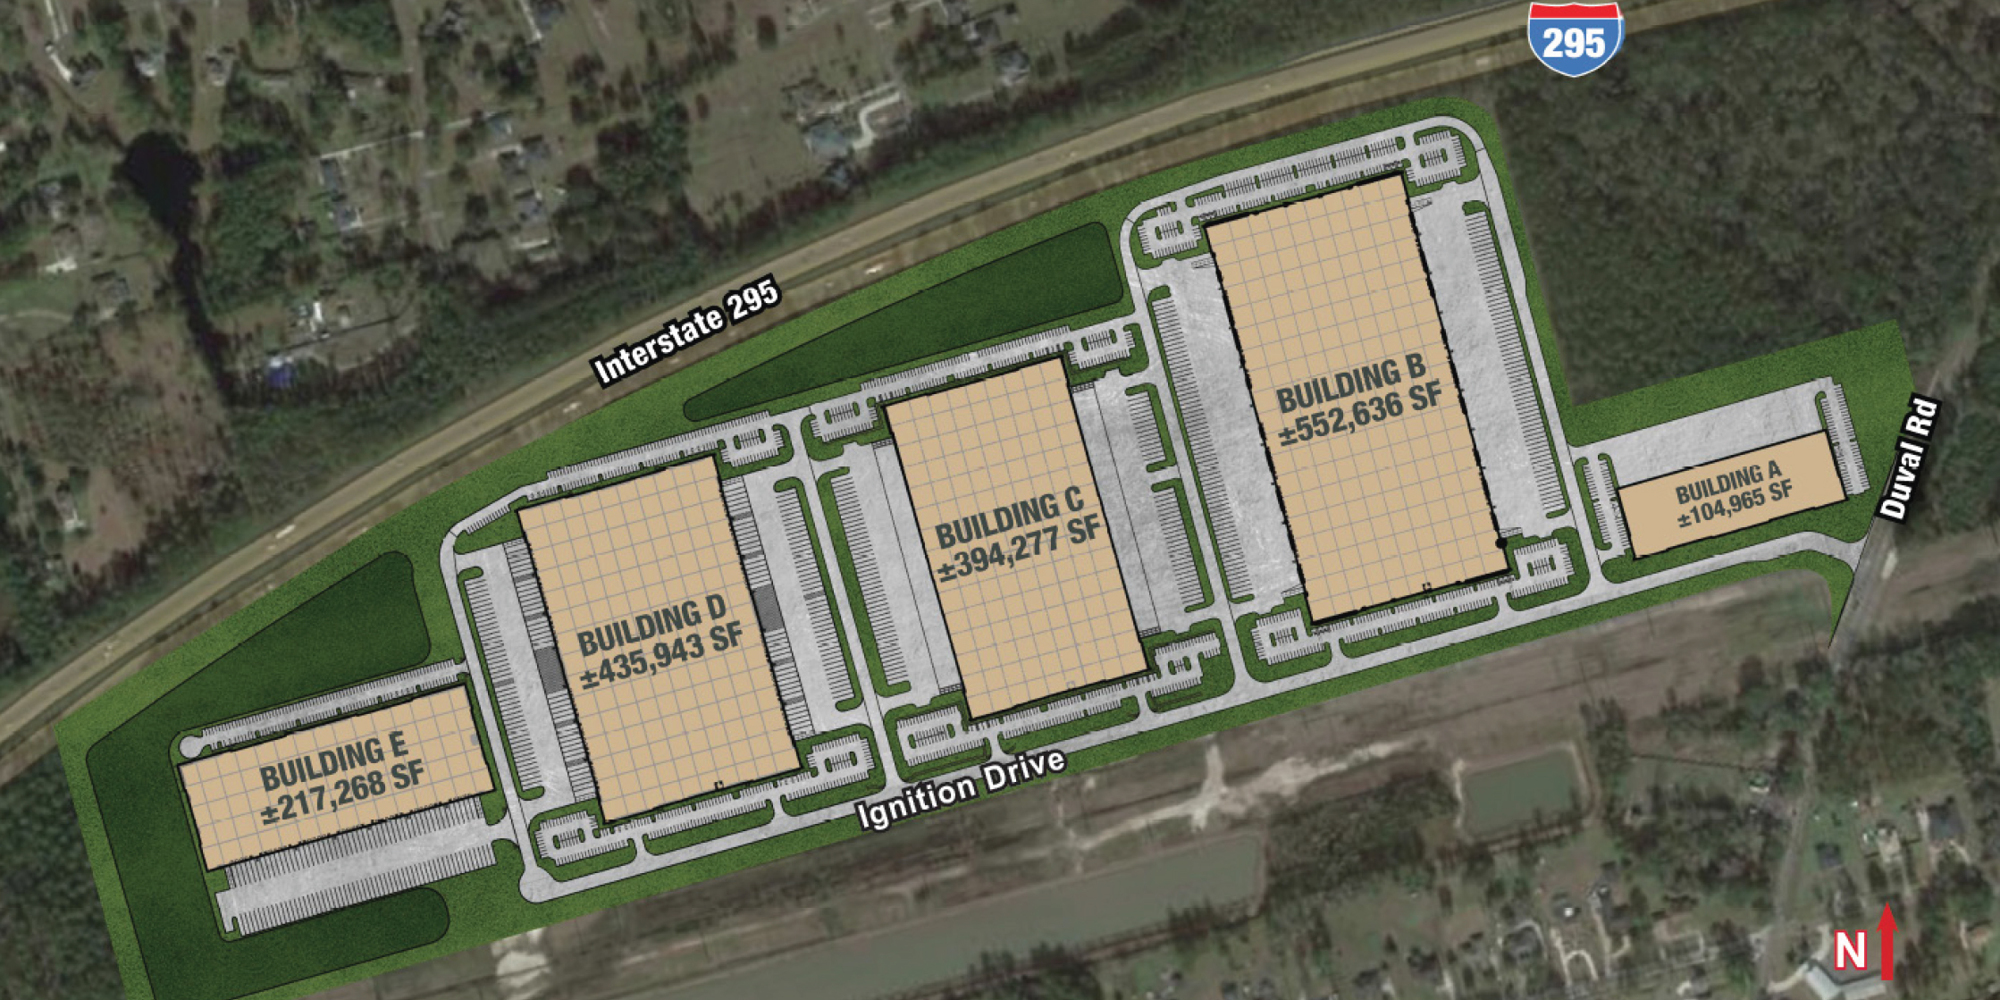 The site plan for Park 295. Buildings C and B are leased.